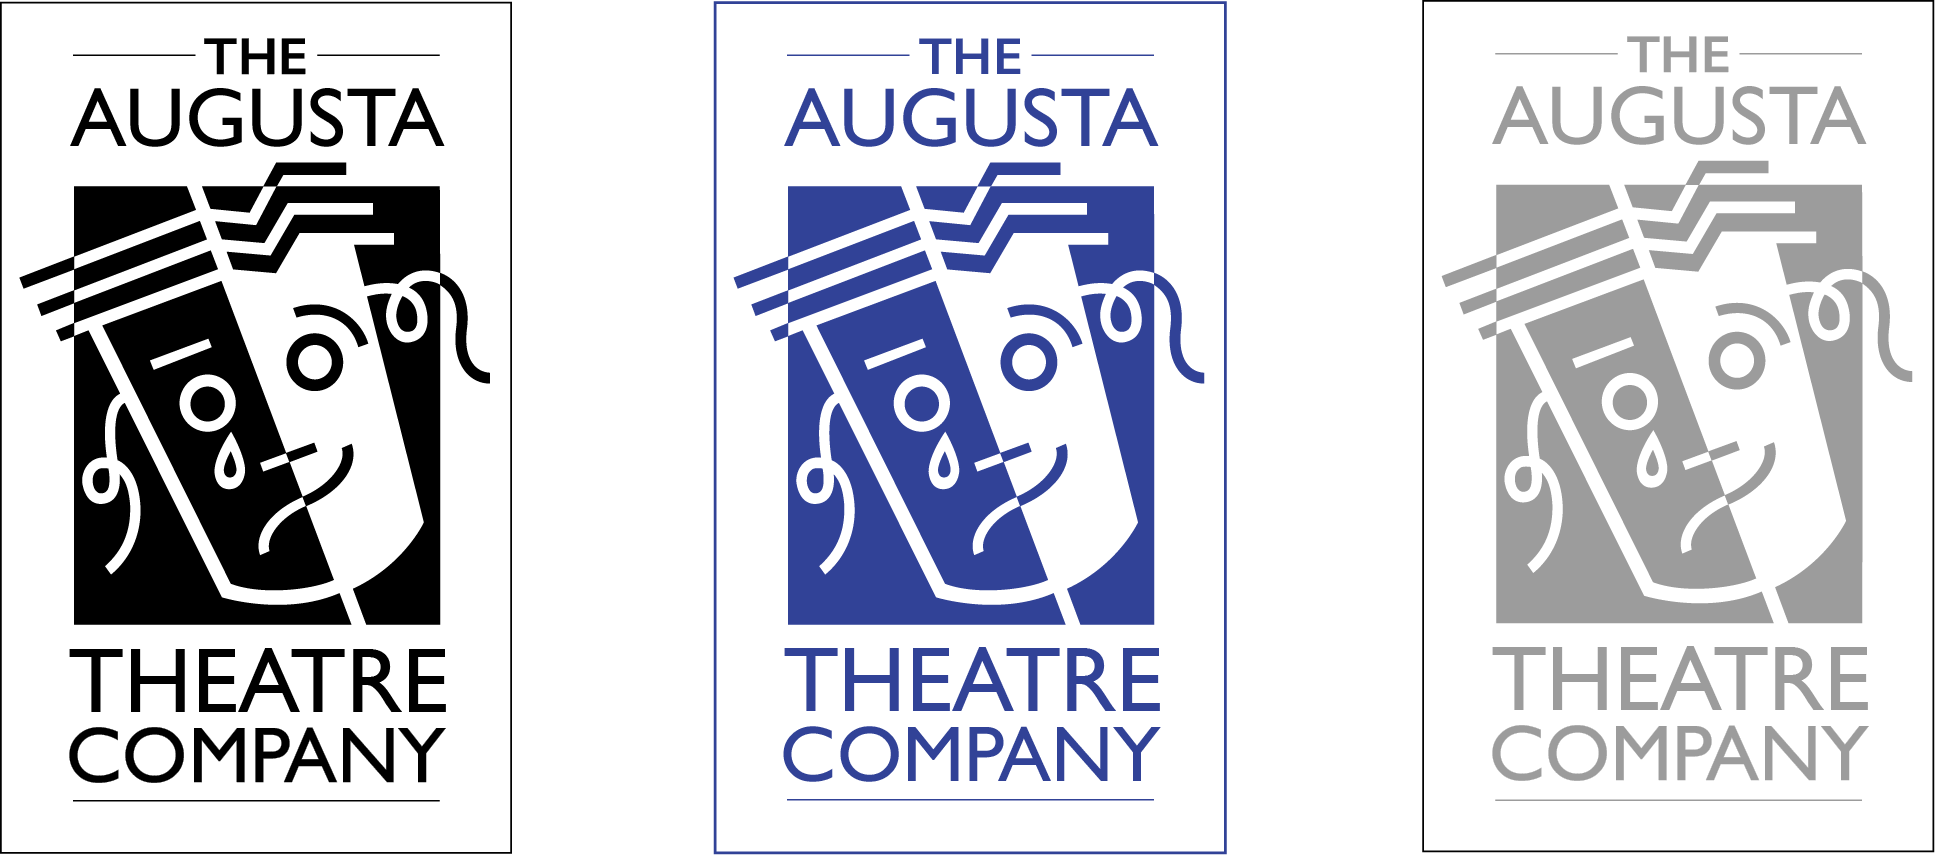 Augusta Theatre Company - Logo in black, blue, and grey all on white background.